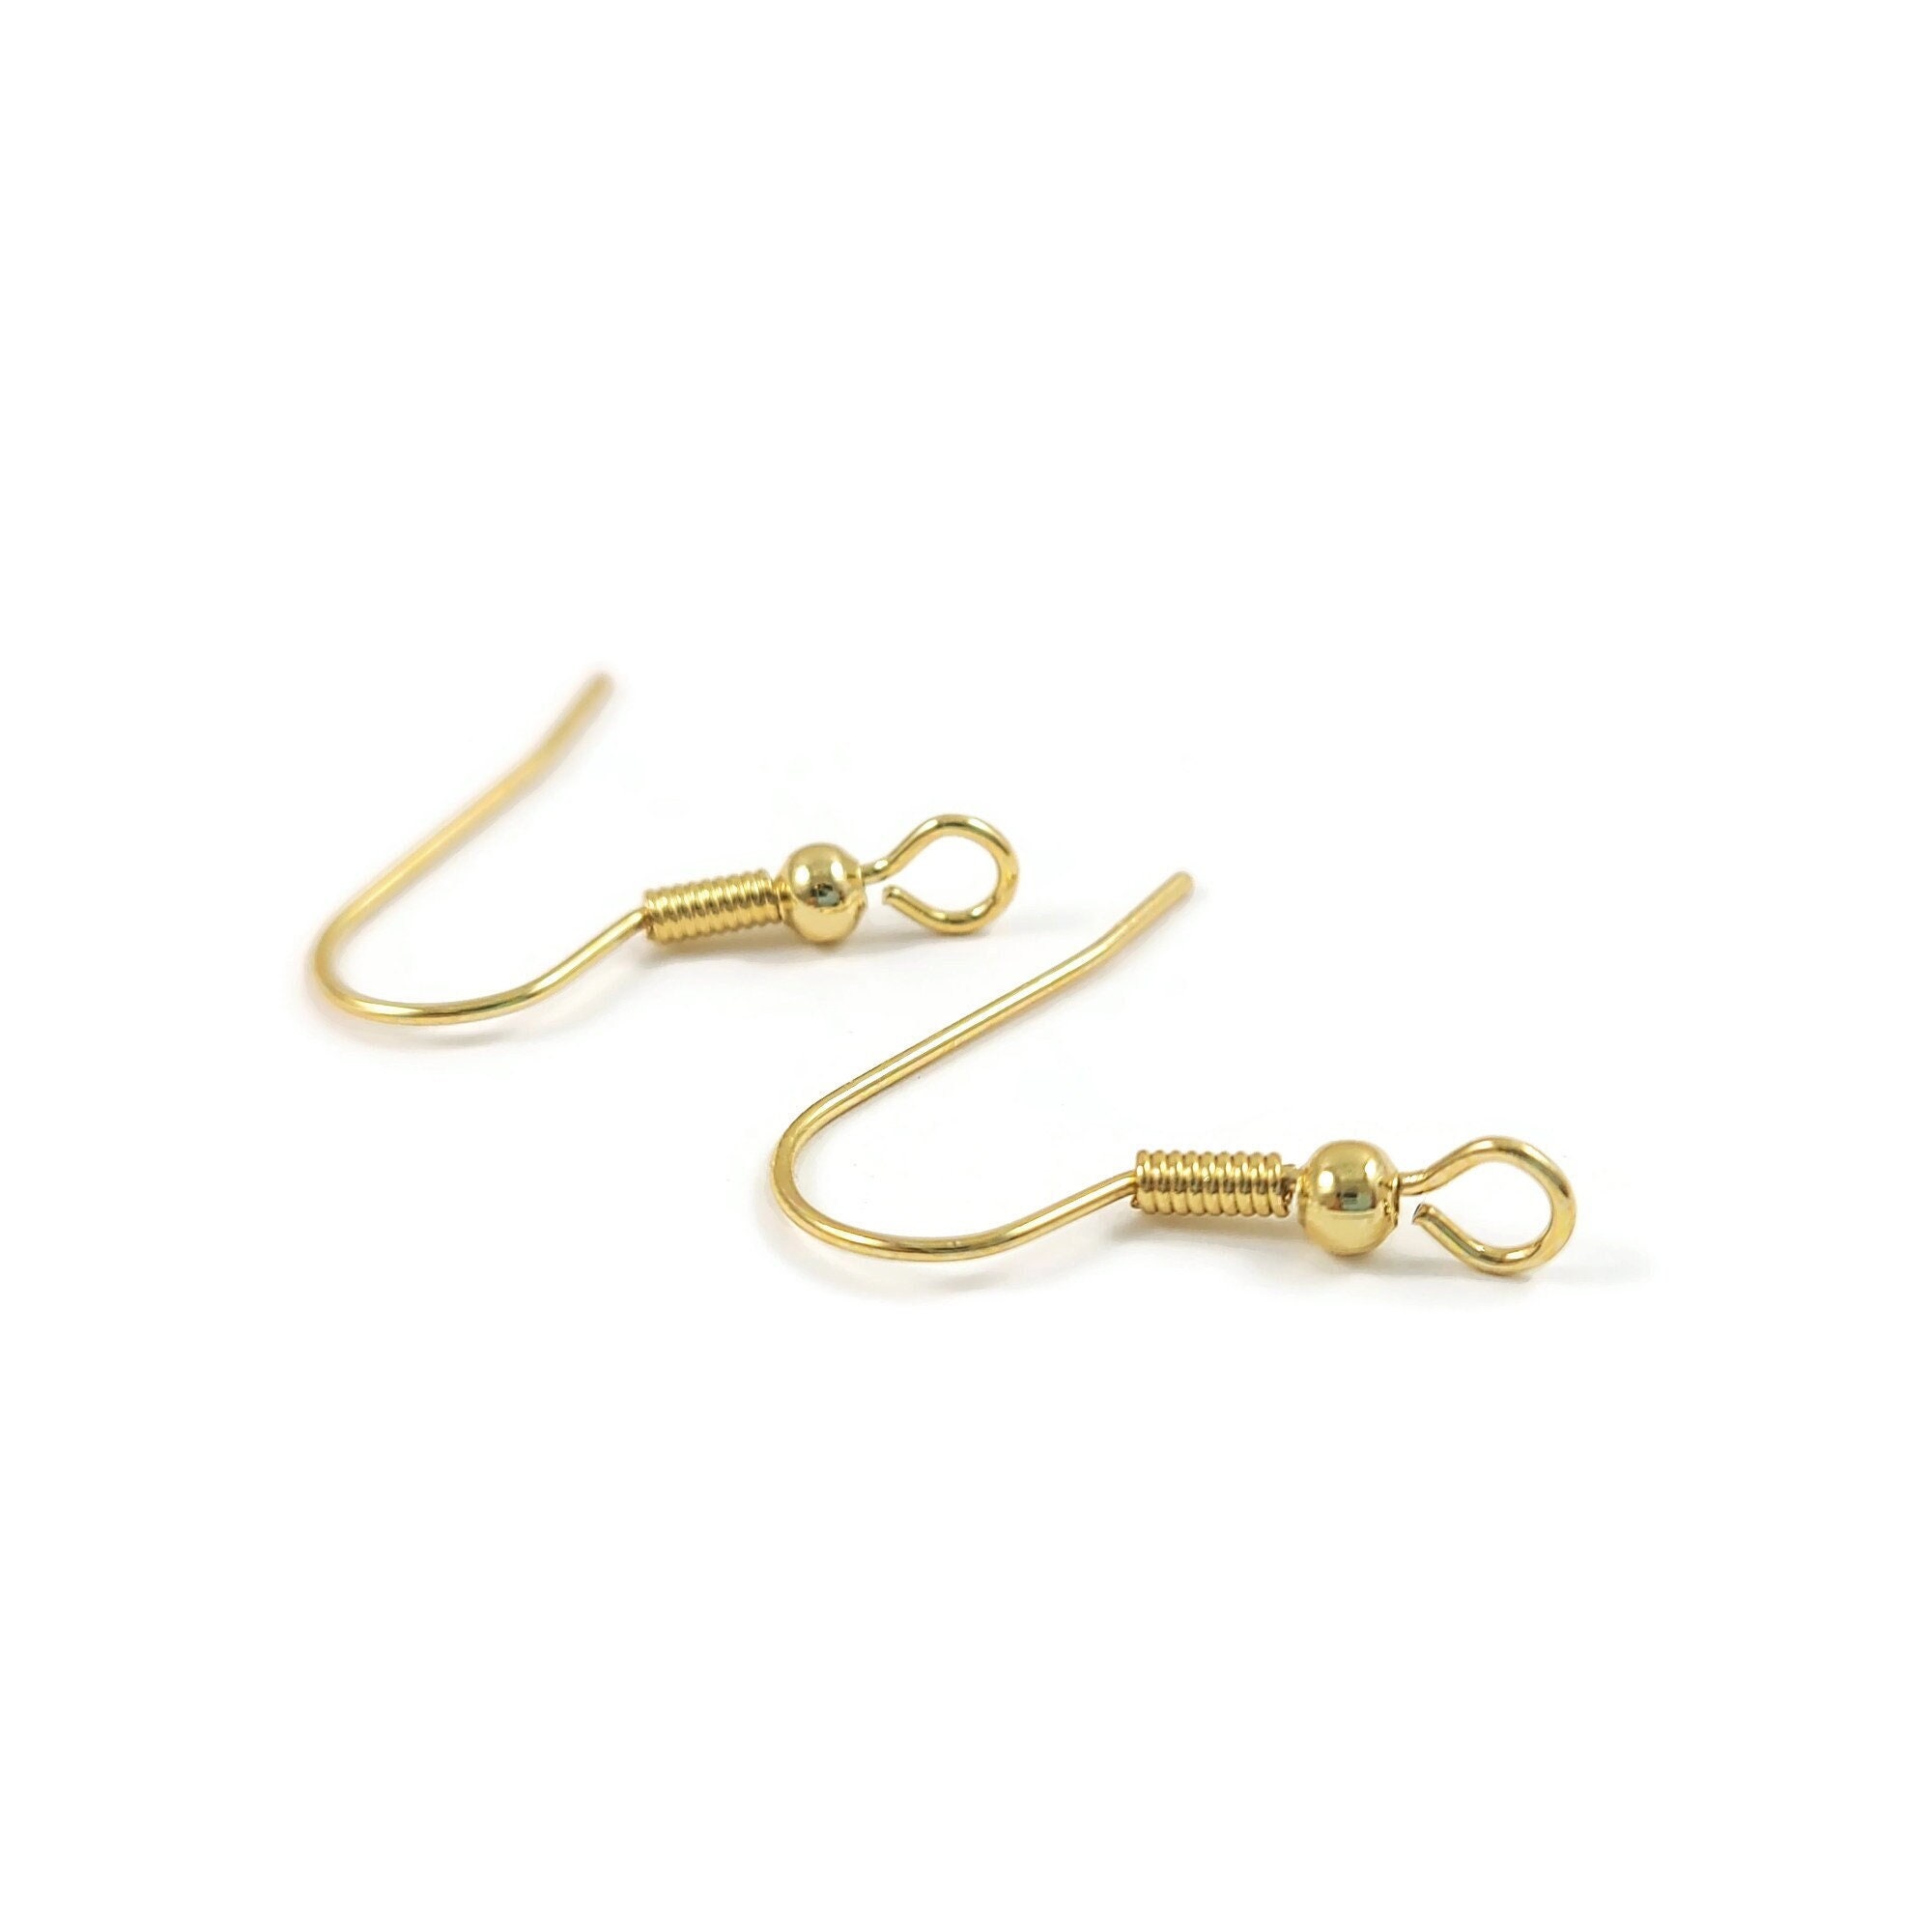 Antique Bronze Solid Brass Leverback Wire Earring Findings Hooks for Jewelry Making - Nickel Free (15mm)